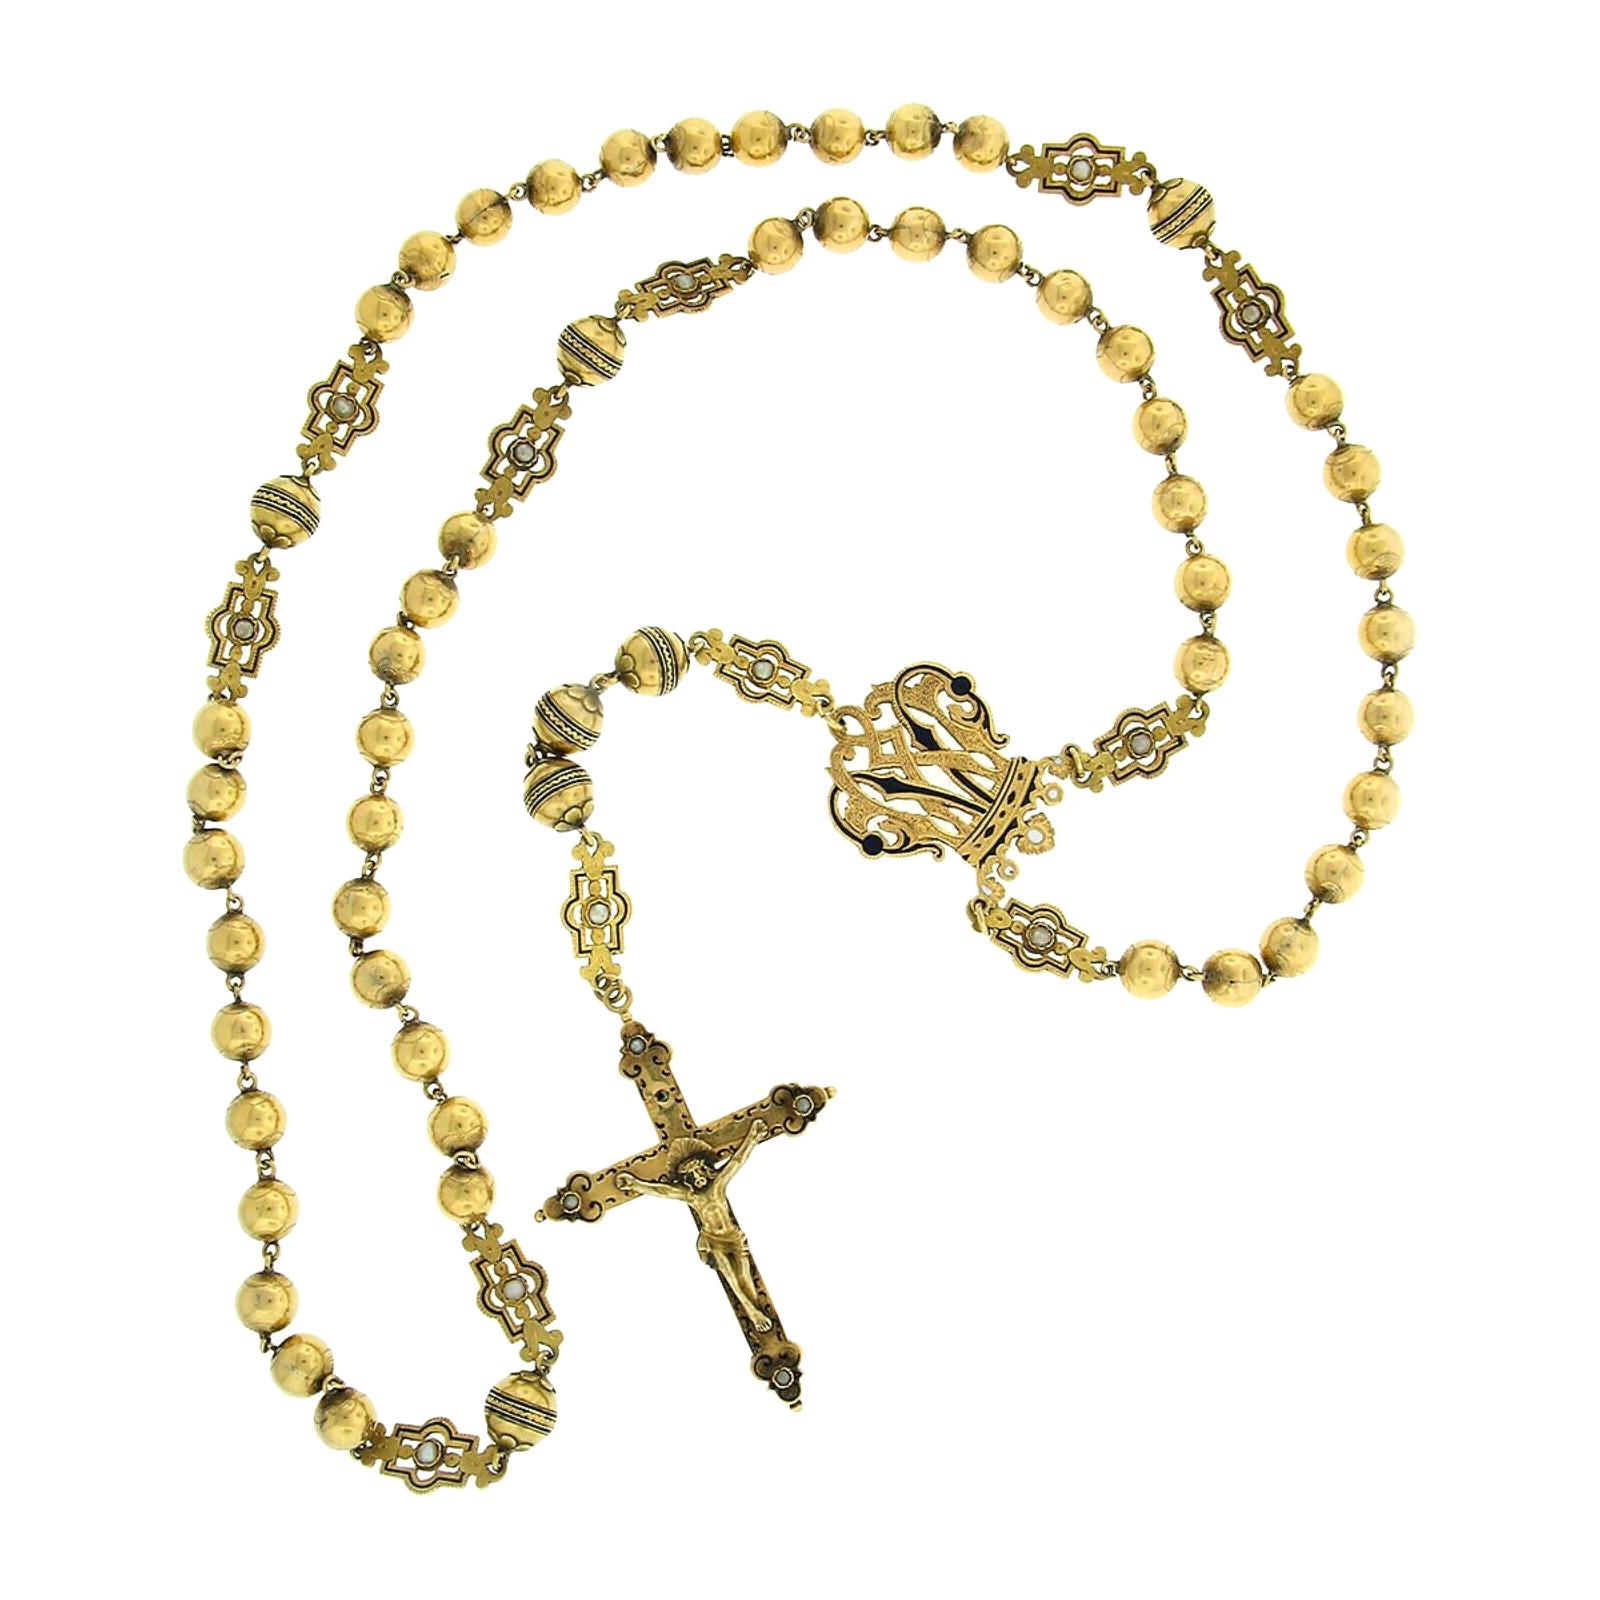 Large Antique 18K Gold Seed Pearl Etched Bead Enamel Rosary Cross Chain Necklace